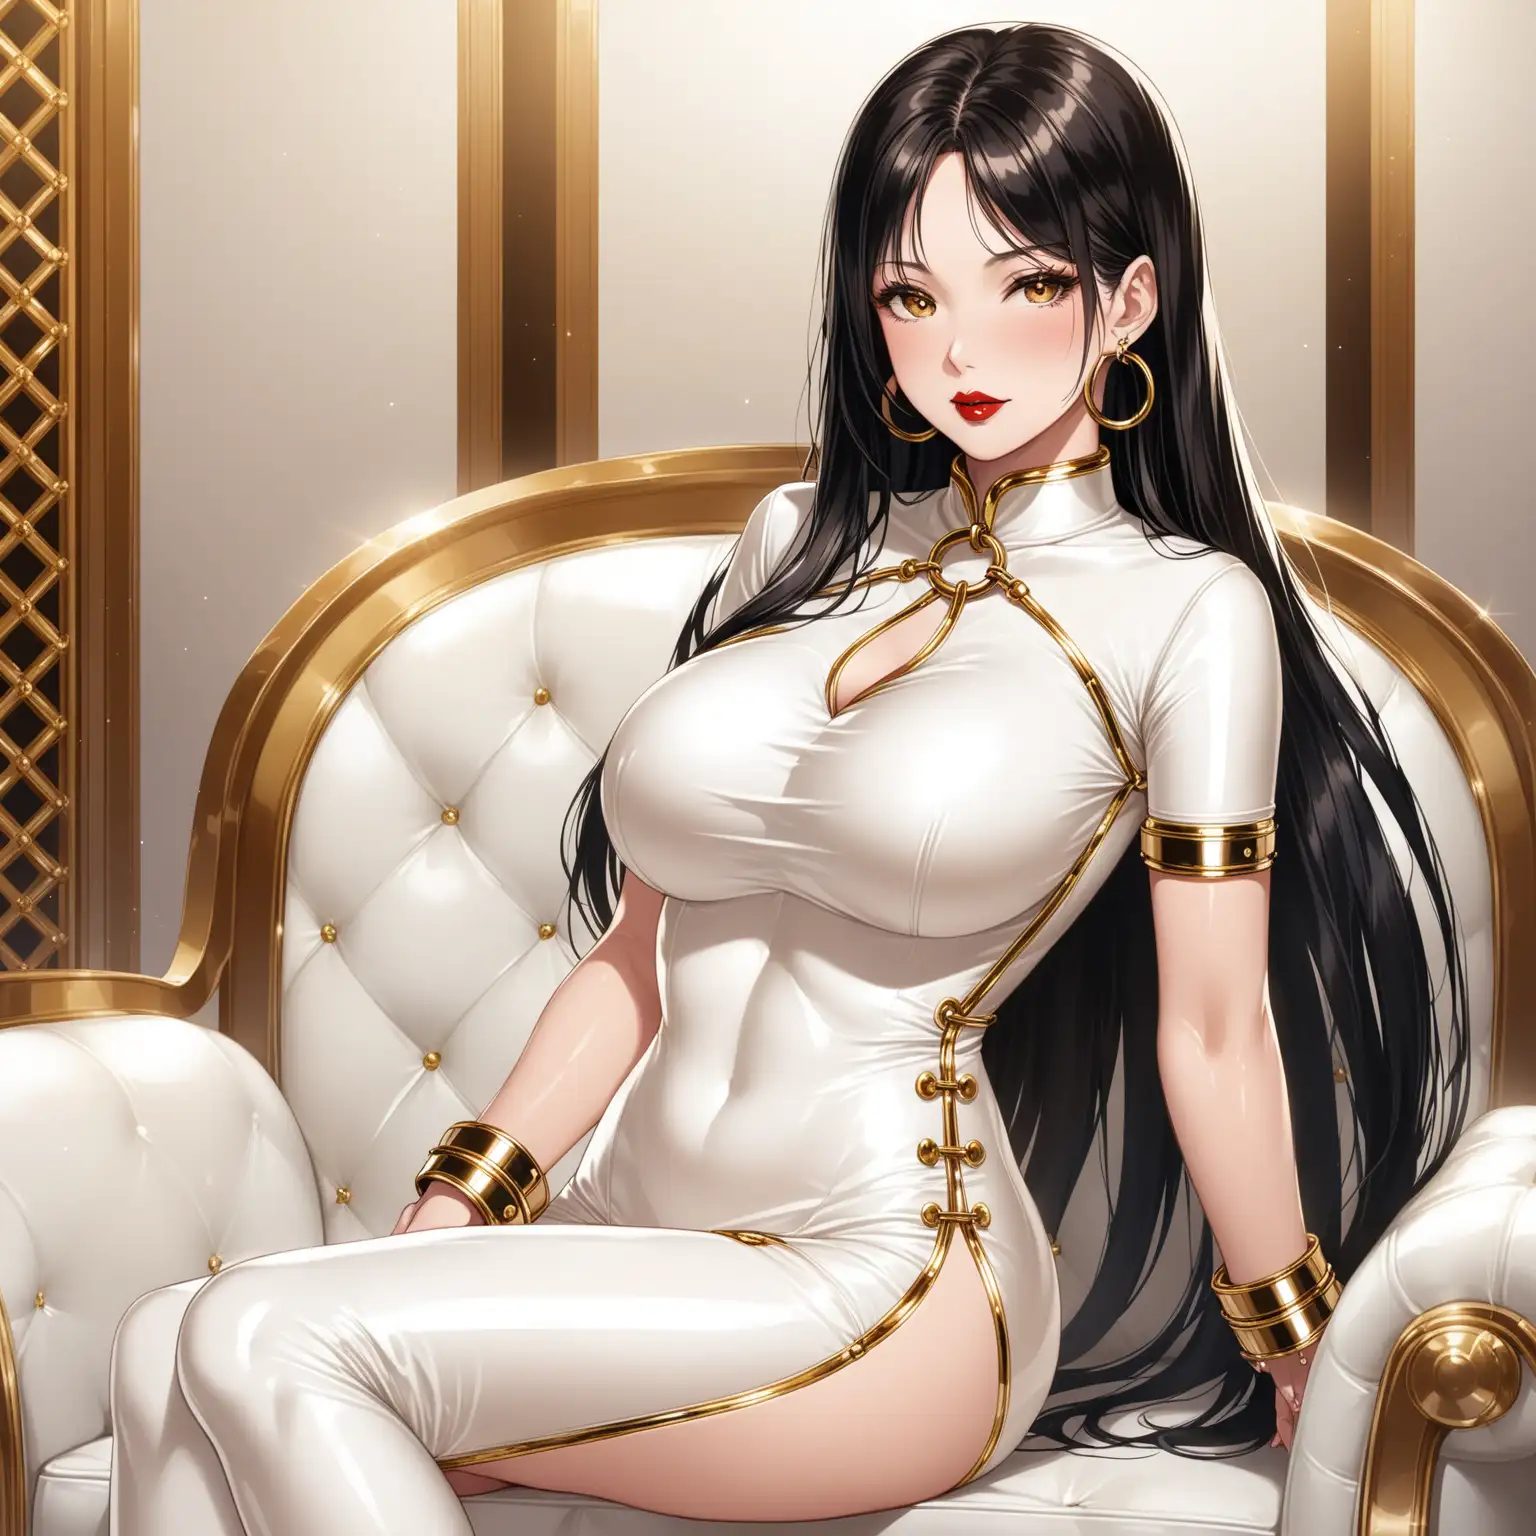 1 woman. She is 60 years old with brown almond shaped eyes. She has extremely long shiny straight black hair that's parted down the middle. She does not have bangs. She has huge tits and is thin. She is wearing a tight white latex short sleeve long cheongsam dress with gold accents, gold jewelry, bdsm wrist restraints and a thick white latex bondage collar with a ring. She is mature and elegant and has shiny red lipstick on. She has a seductive expression. She is in a royal palace with white leather furniture with gold accents. She does not look young, she looks middle aged. She is not sweaty or wet.